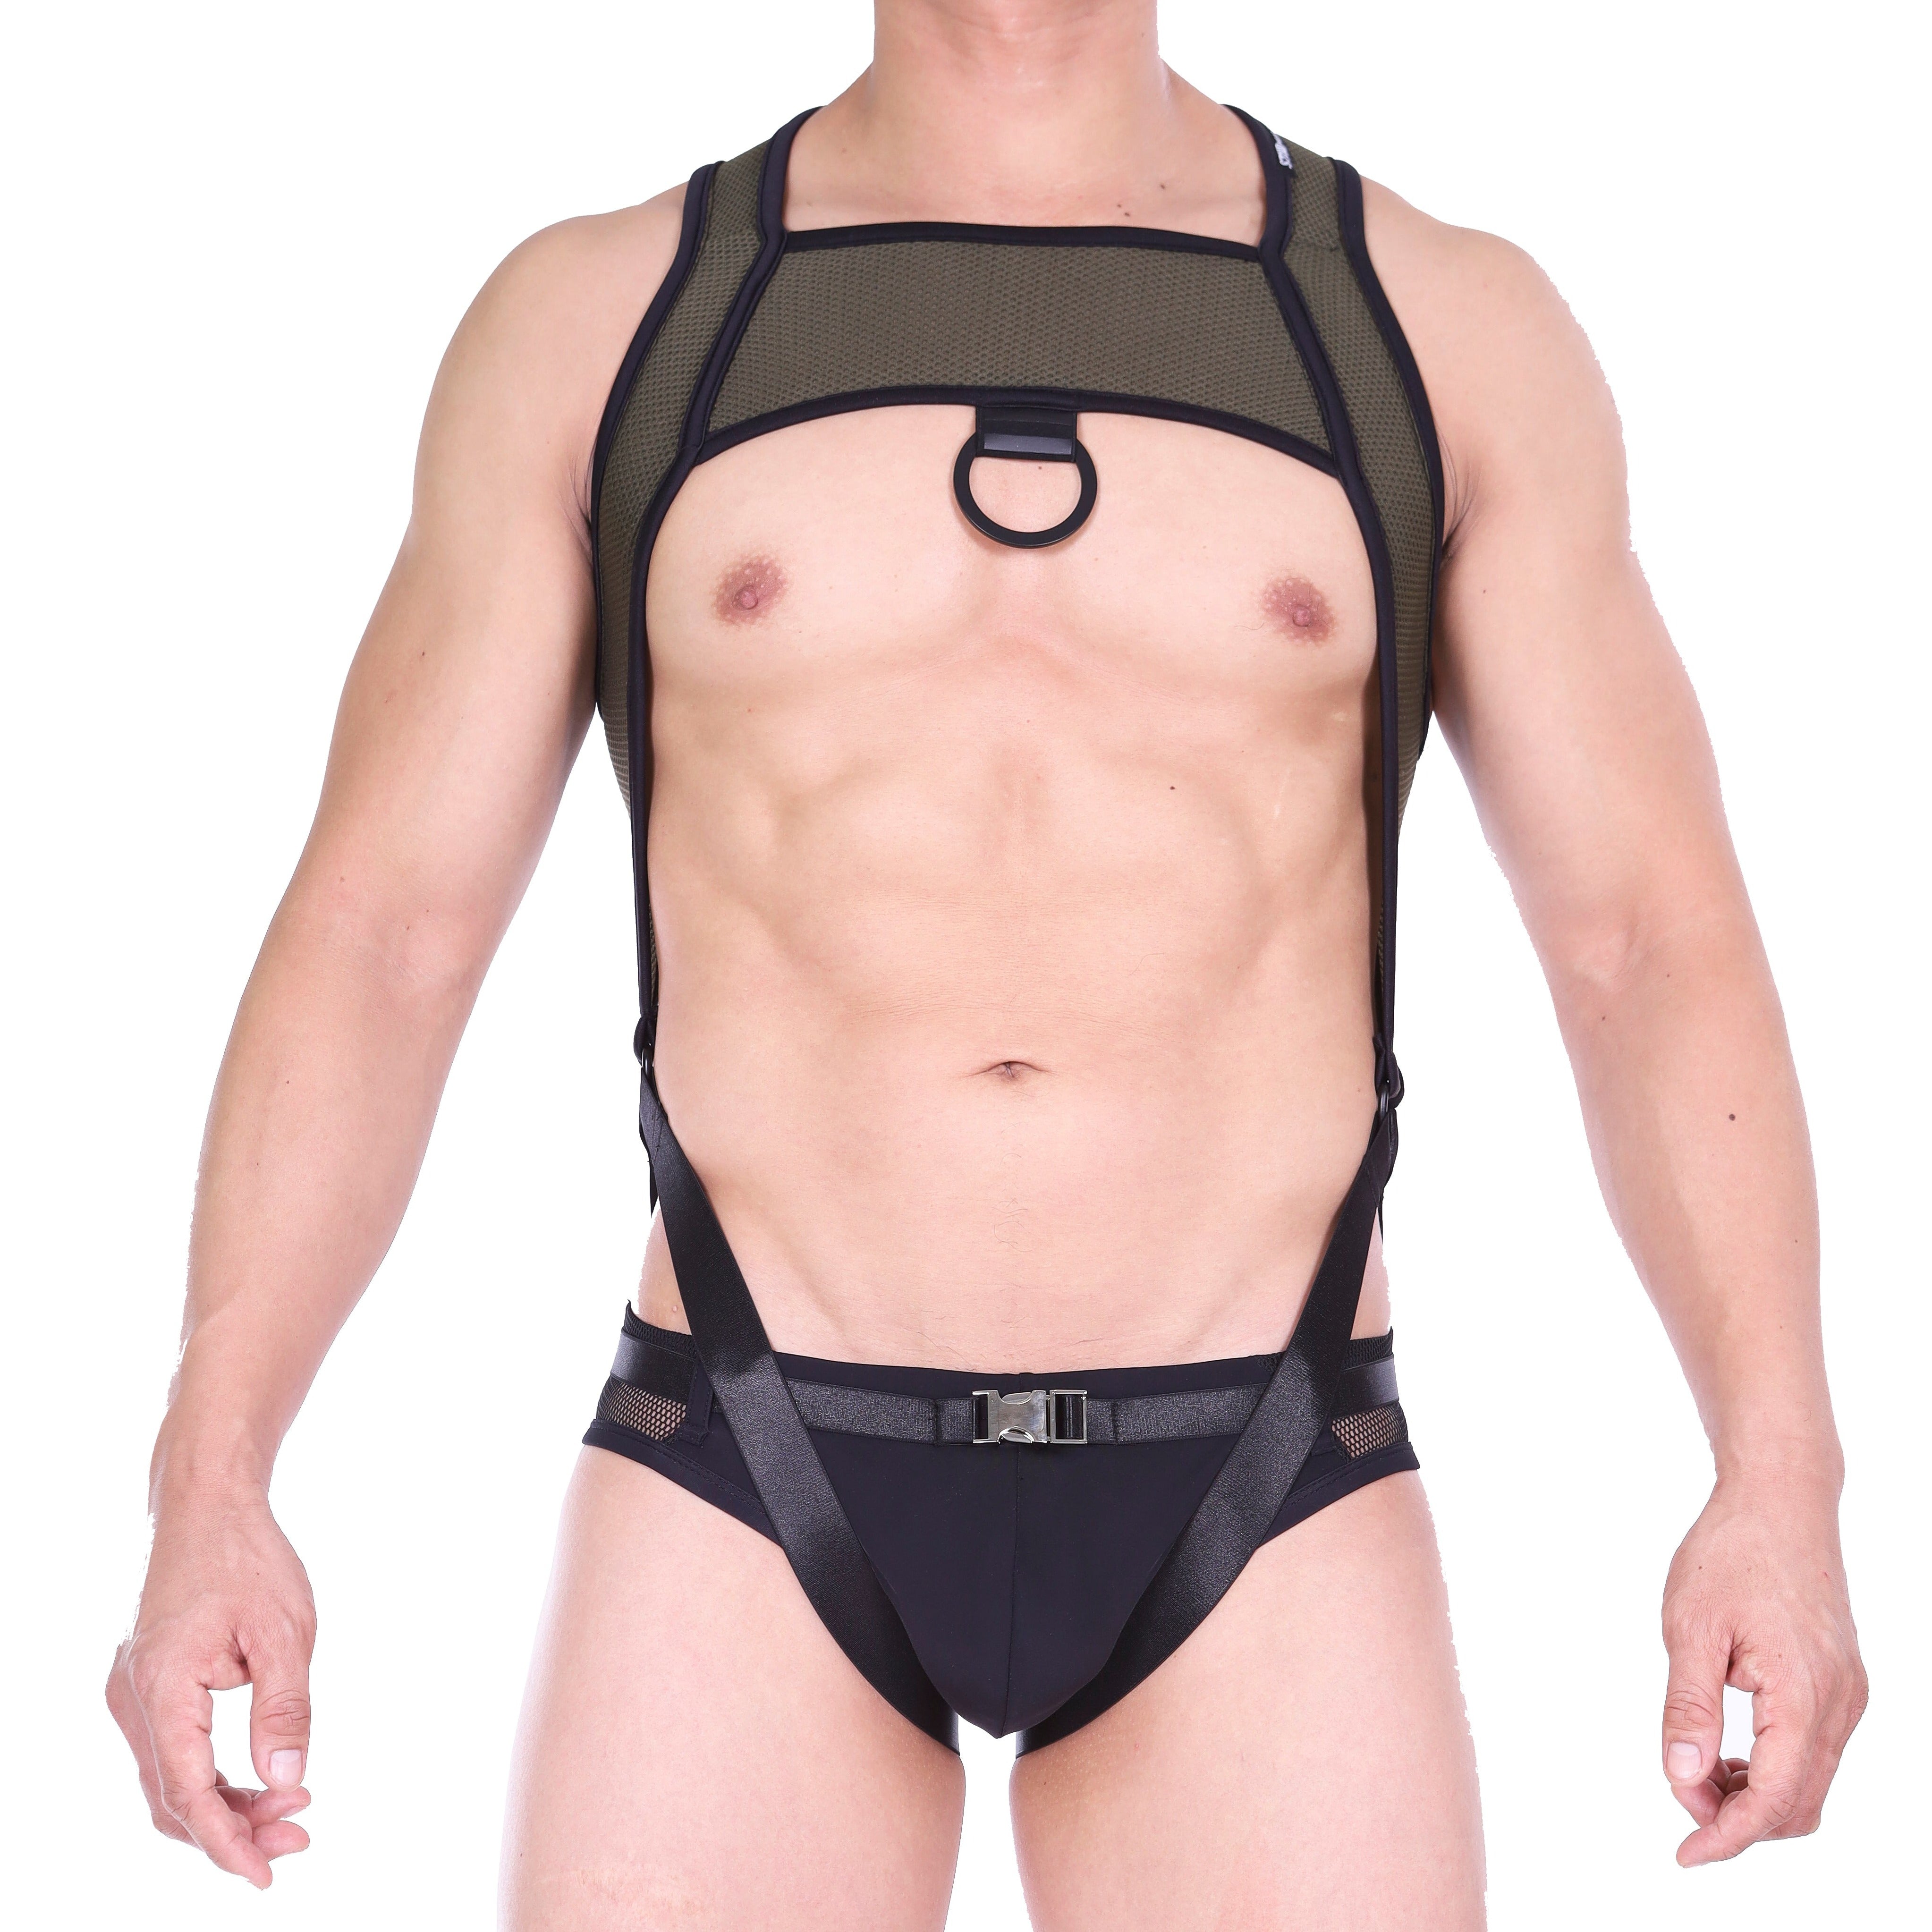 Deploy Body Harness - Army Green